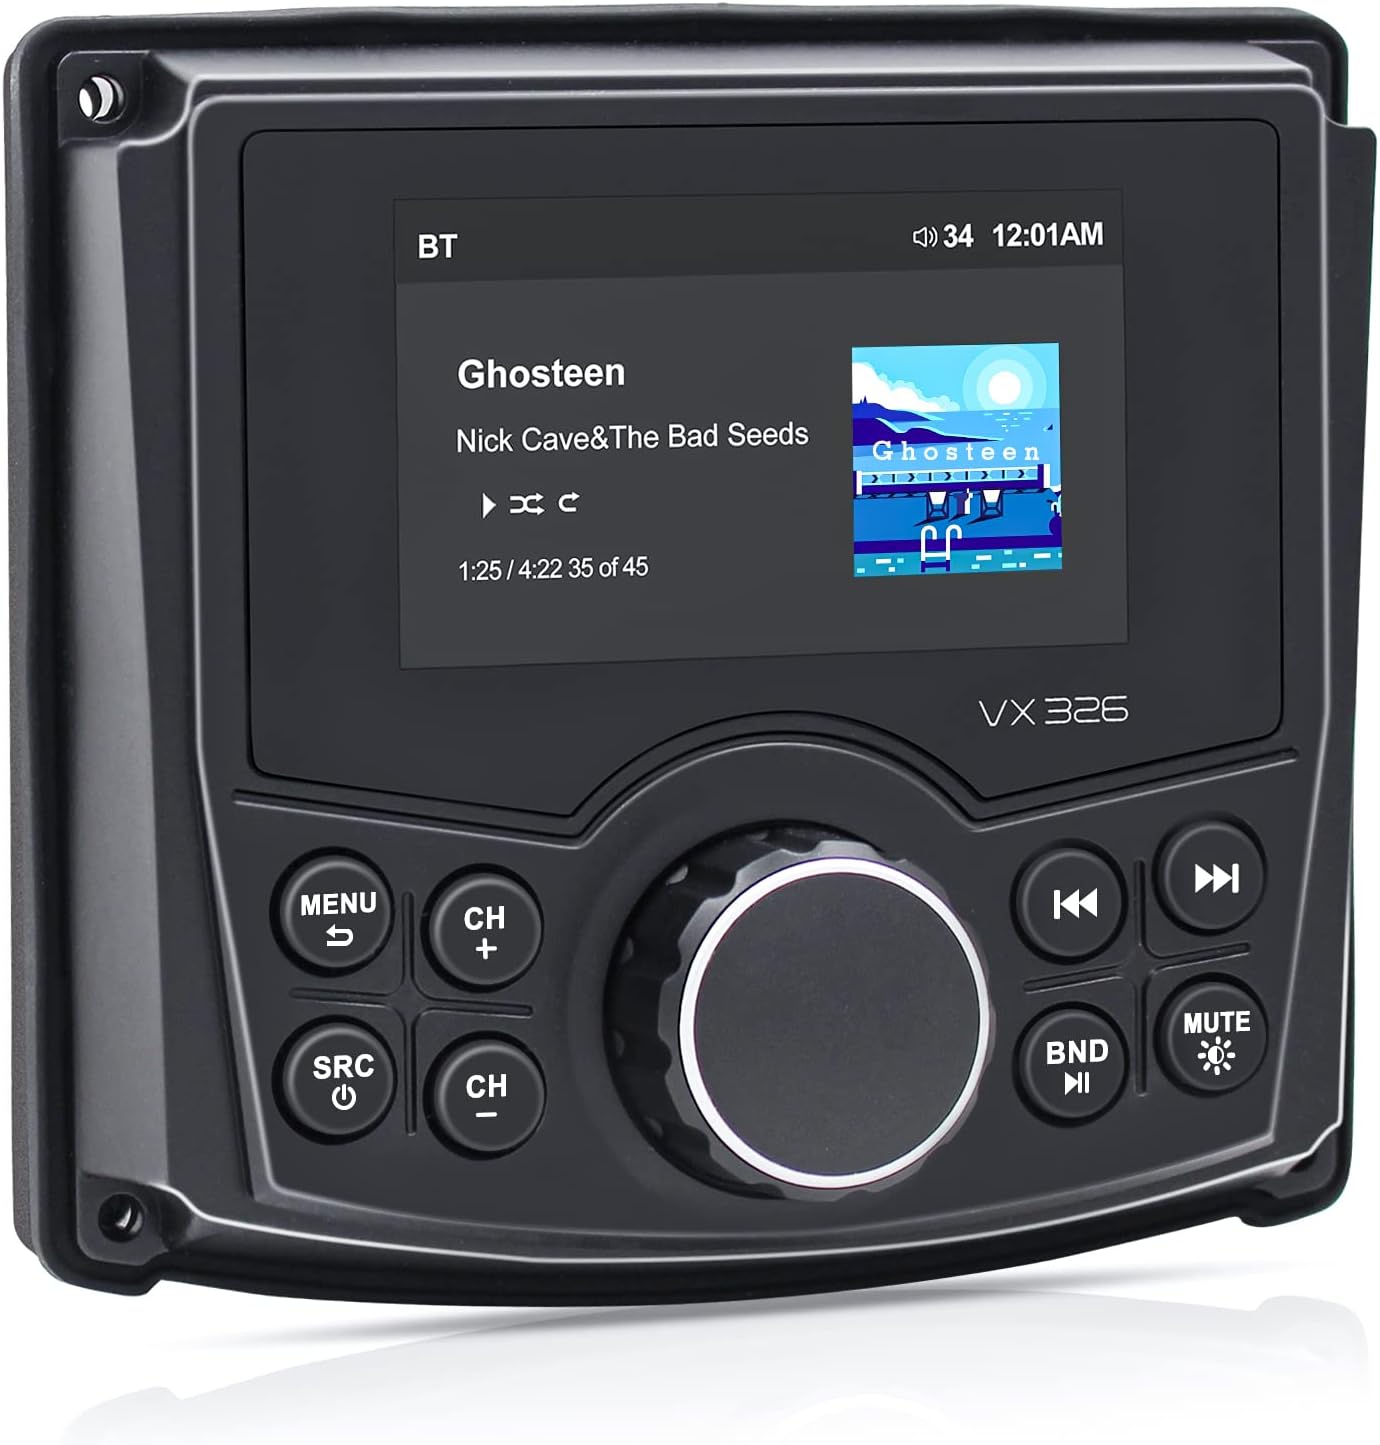 It is exactly as described, easy to install, Bluetooth connection was a breeze, and sounds great! I installed this in the 2x4 wall cavity of my ice fishing house. Changing stations is a little cumbersome, but I still give it 5 stars.